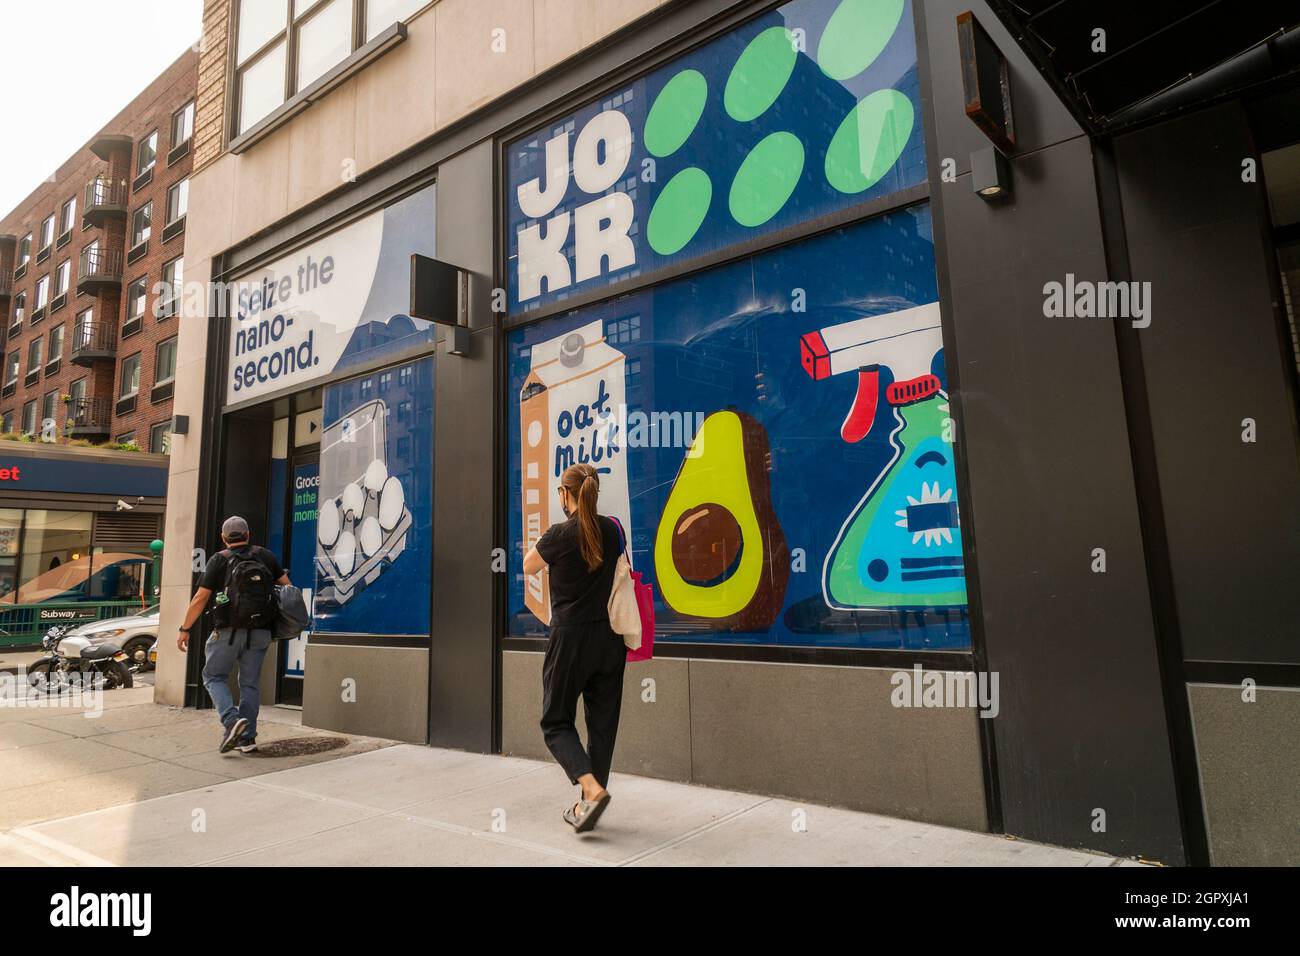 A distribution store for grocery delivery service Jokr in the Chelsea neighborhood of New York on Tuesday, September 14, 2021. Gorillas, 1520, Buyk, Jokr and Fridge No More are competing for the instant delivery space in New York. (© Richard B. Levine) Stock Photo